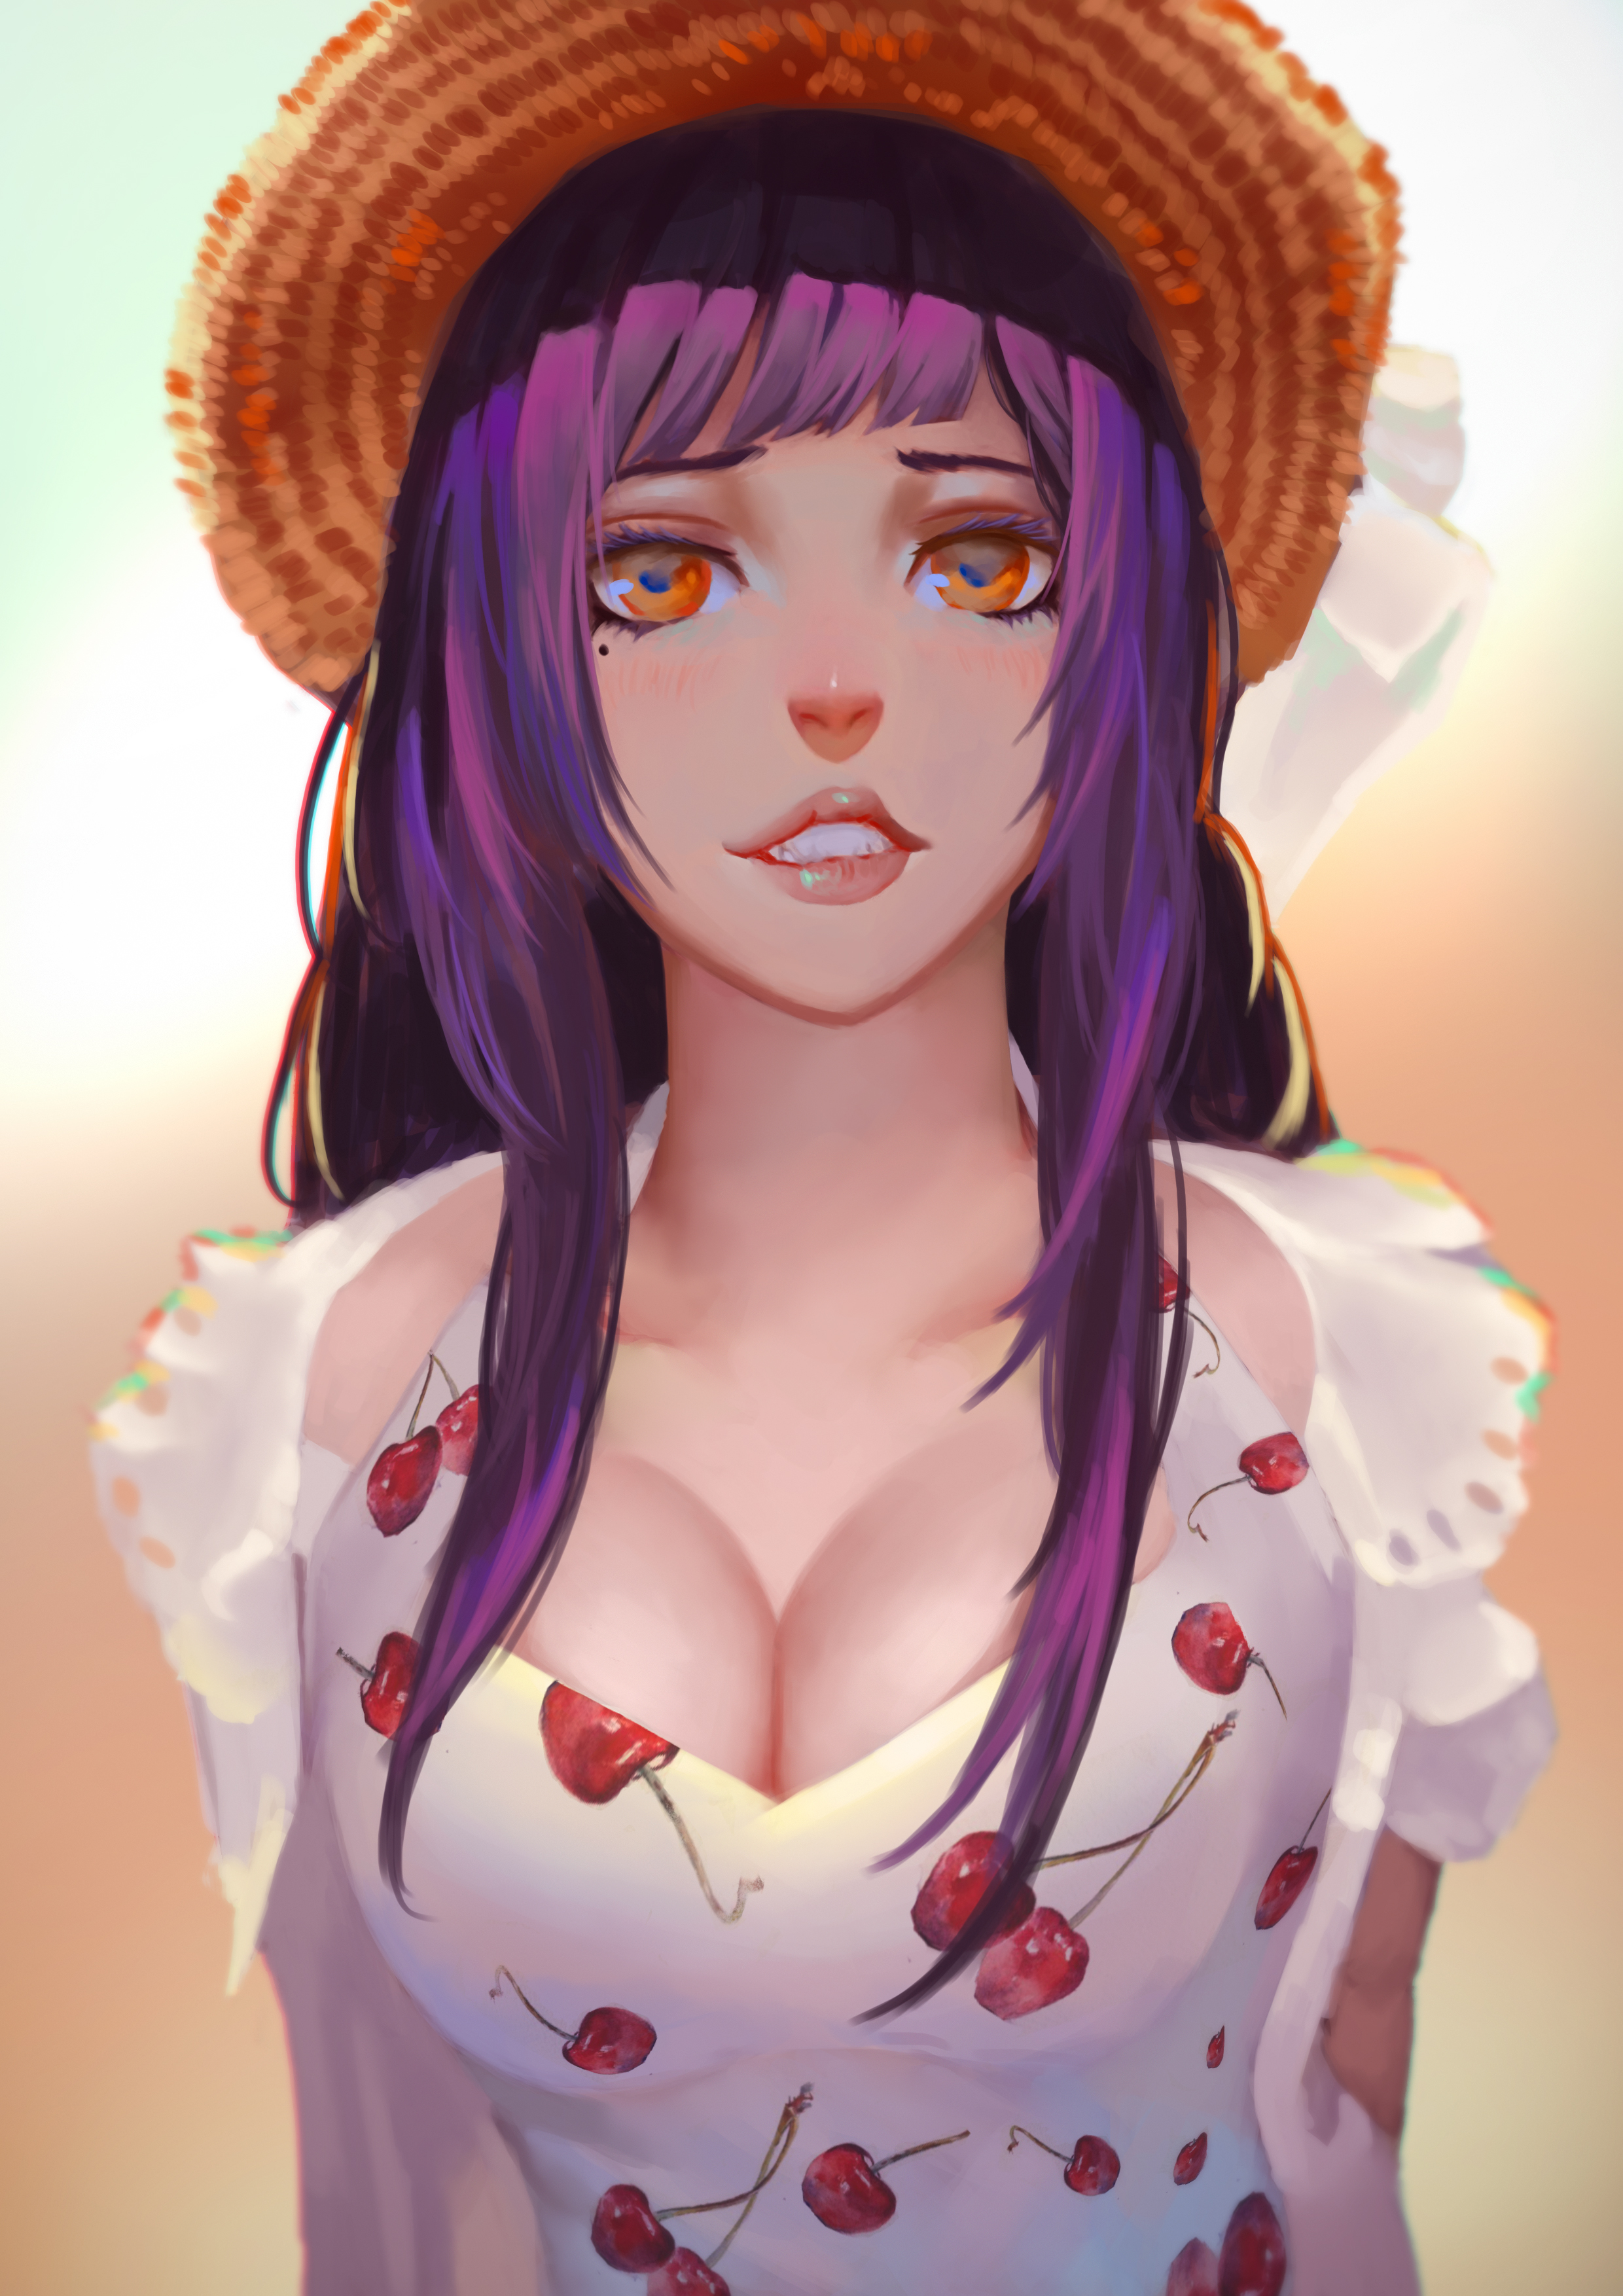 Anime Girls Original Characters Women Women With Hats Straw Hat Purple Hair Long Hair Looking At Vie 2480x3508